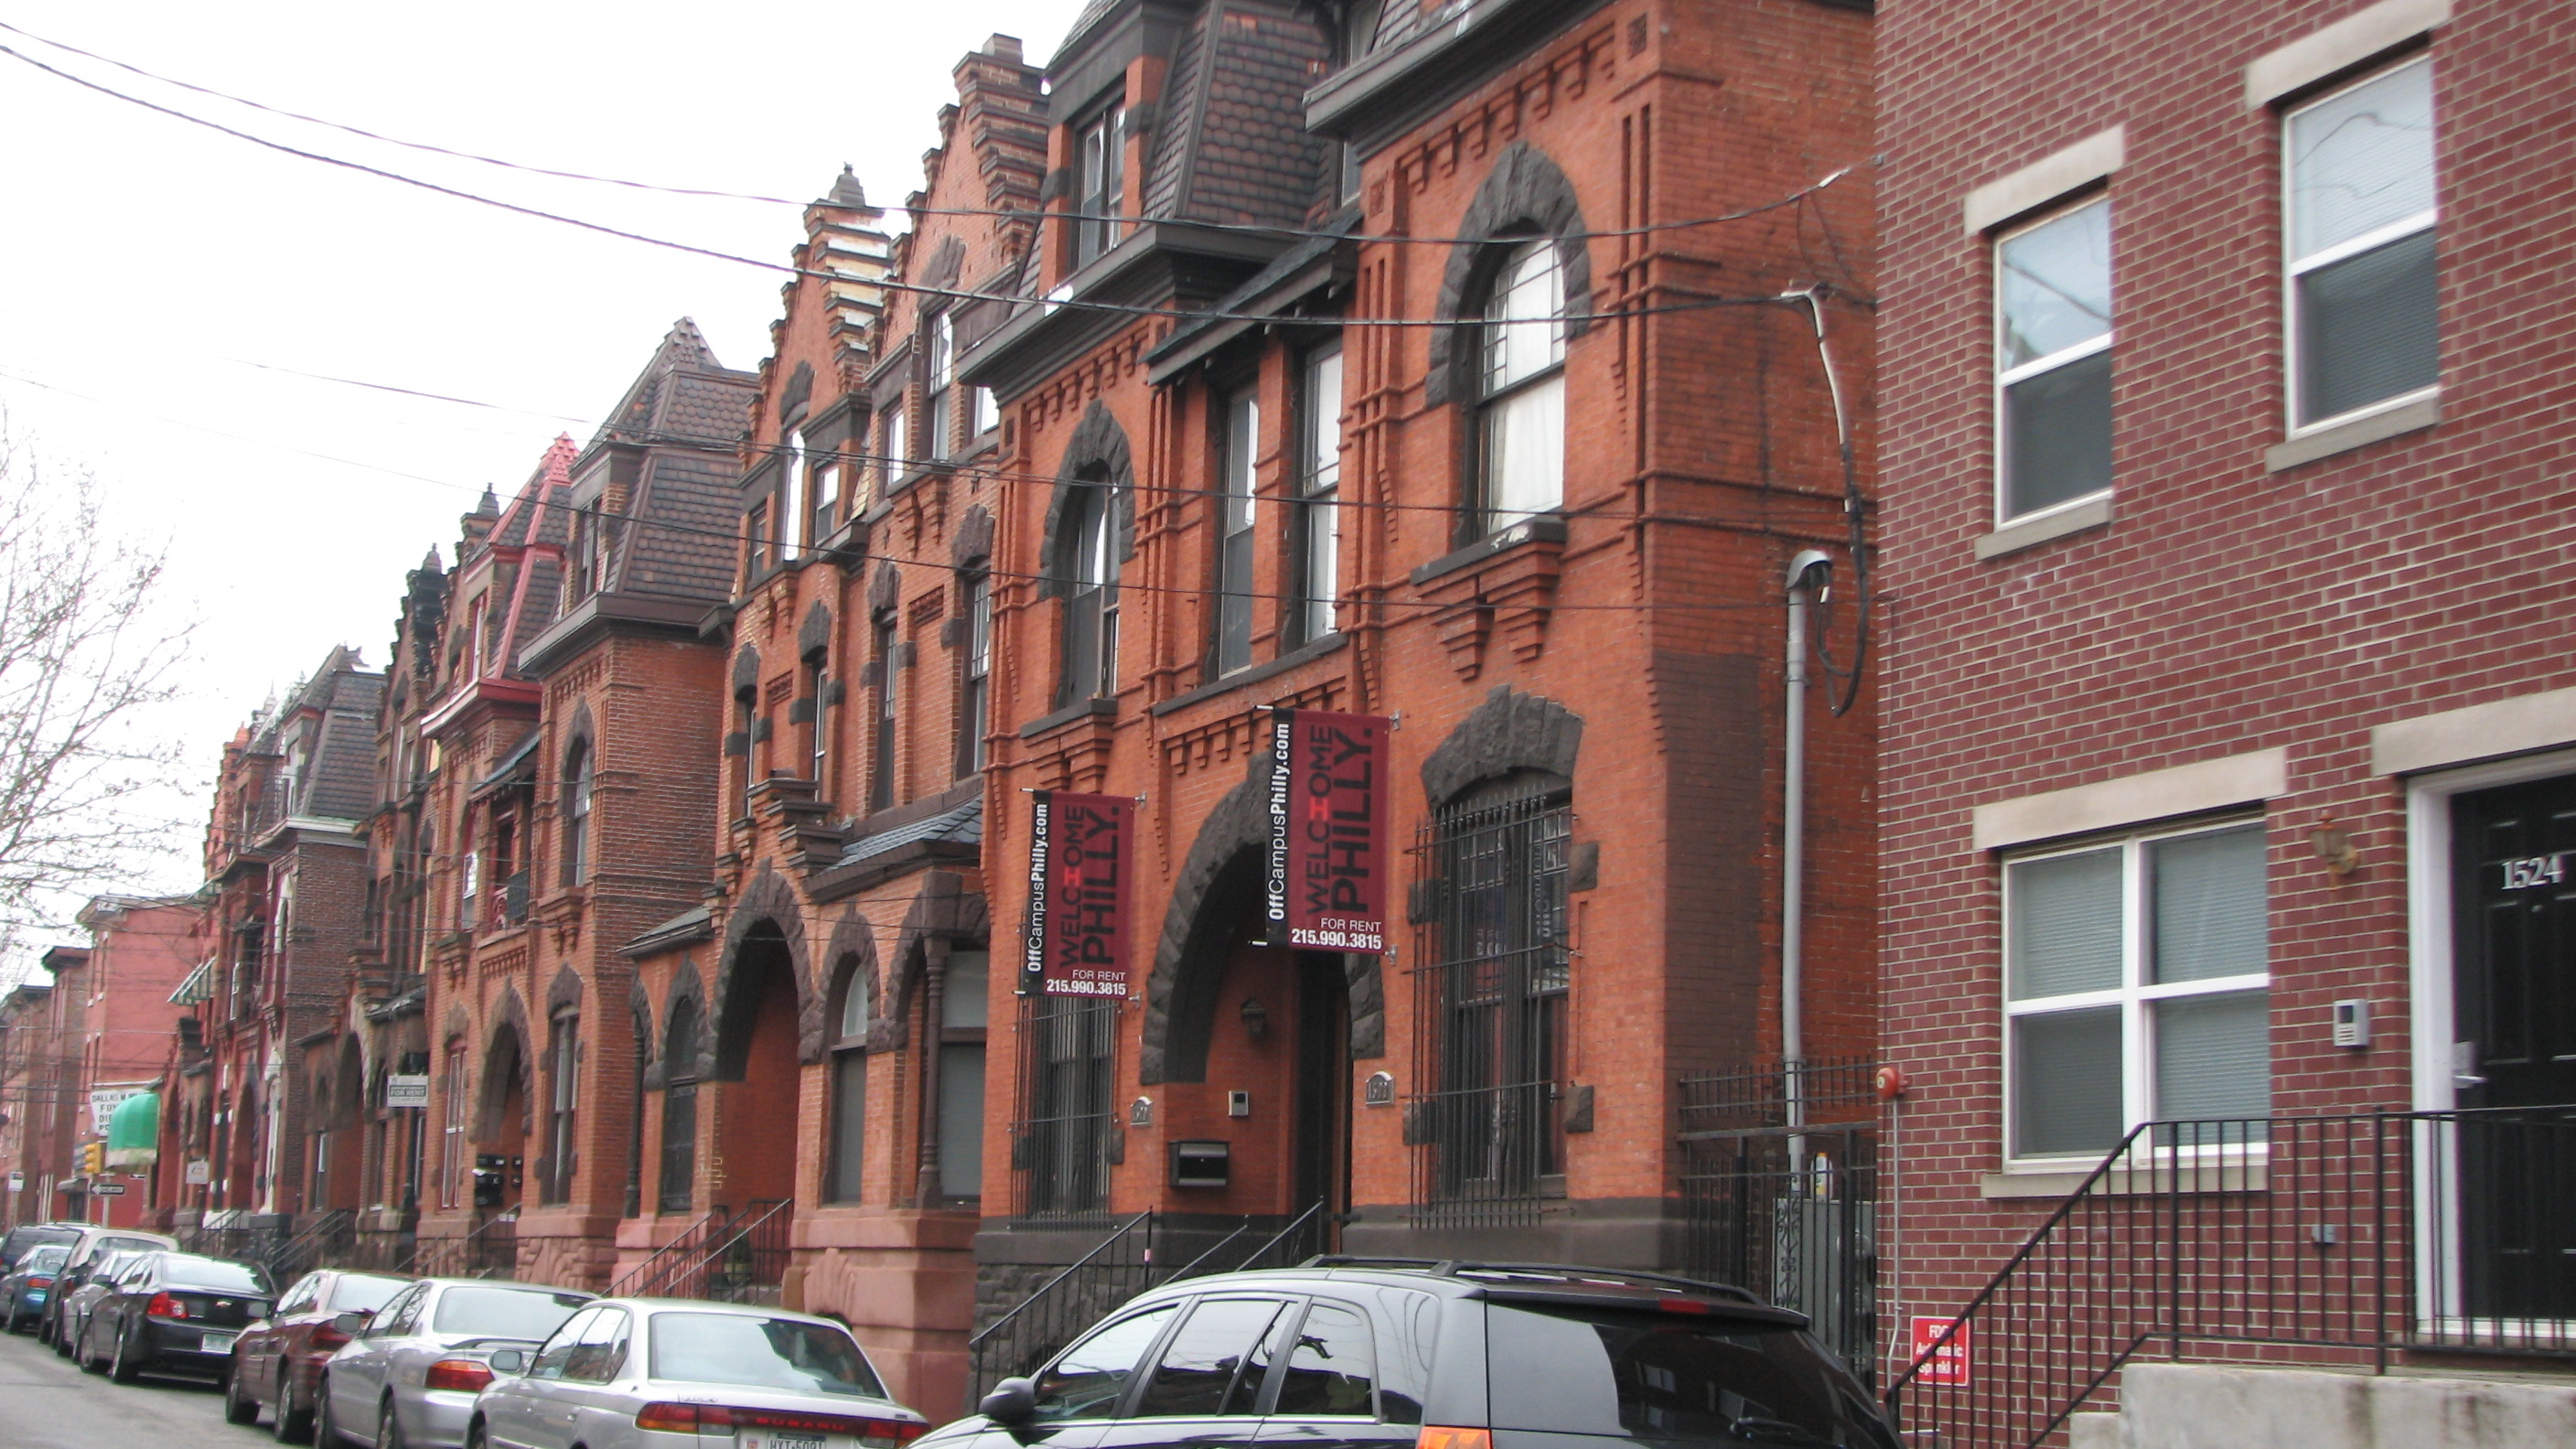 The twin houses at 1500 to 1522 North 17th Street were designed in 1886 by Willis Hale. 